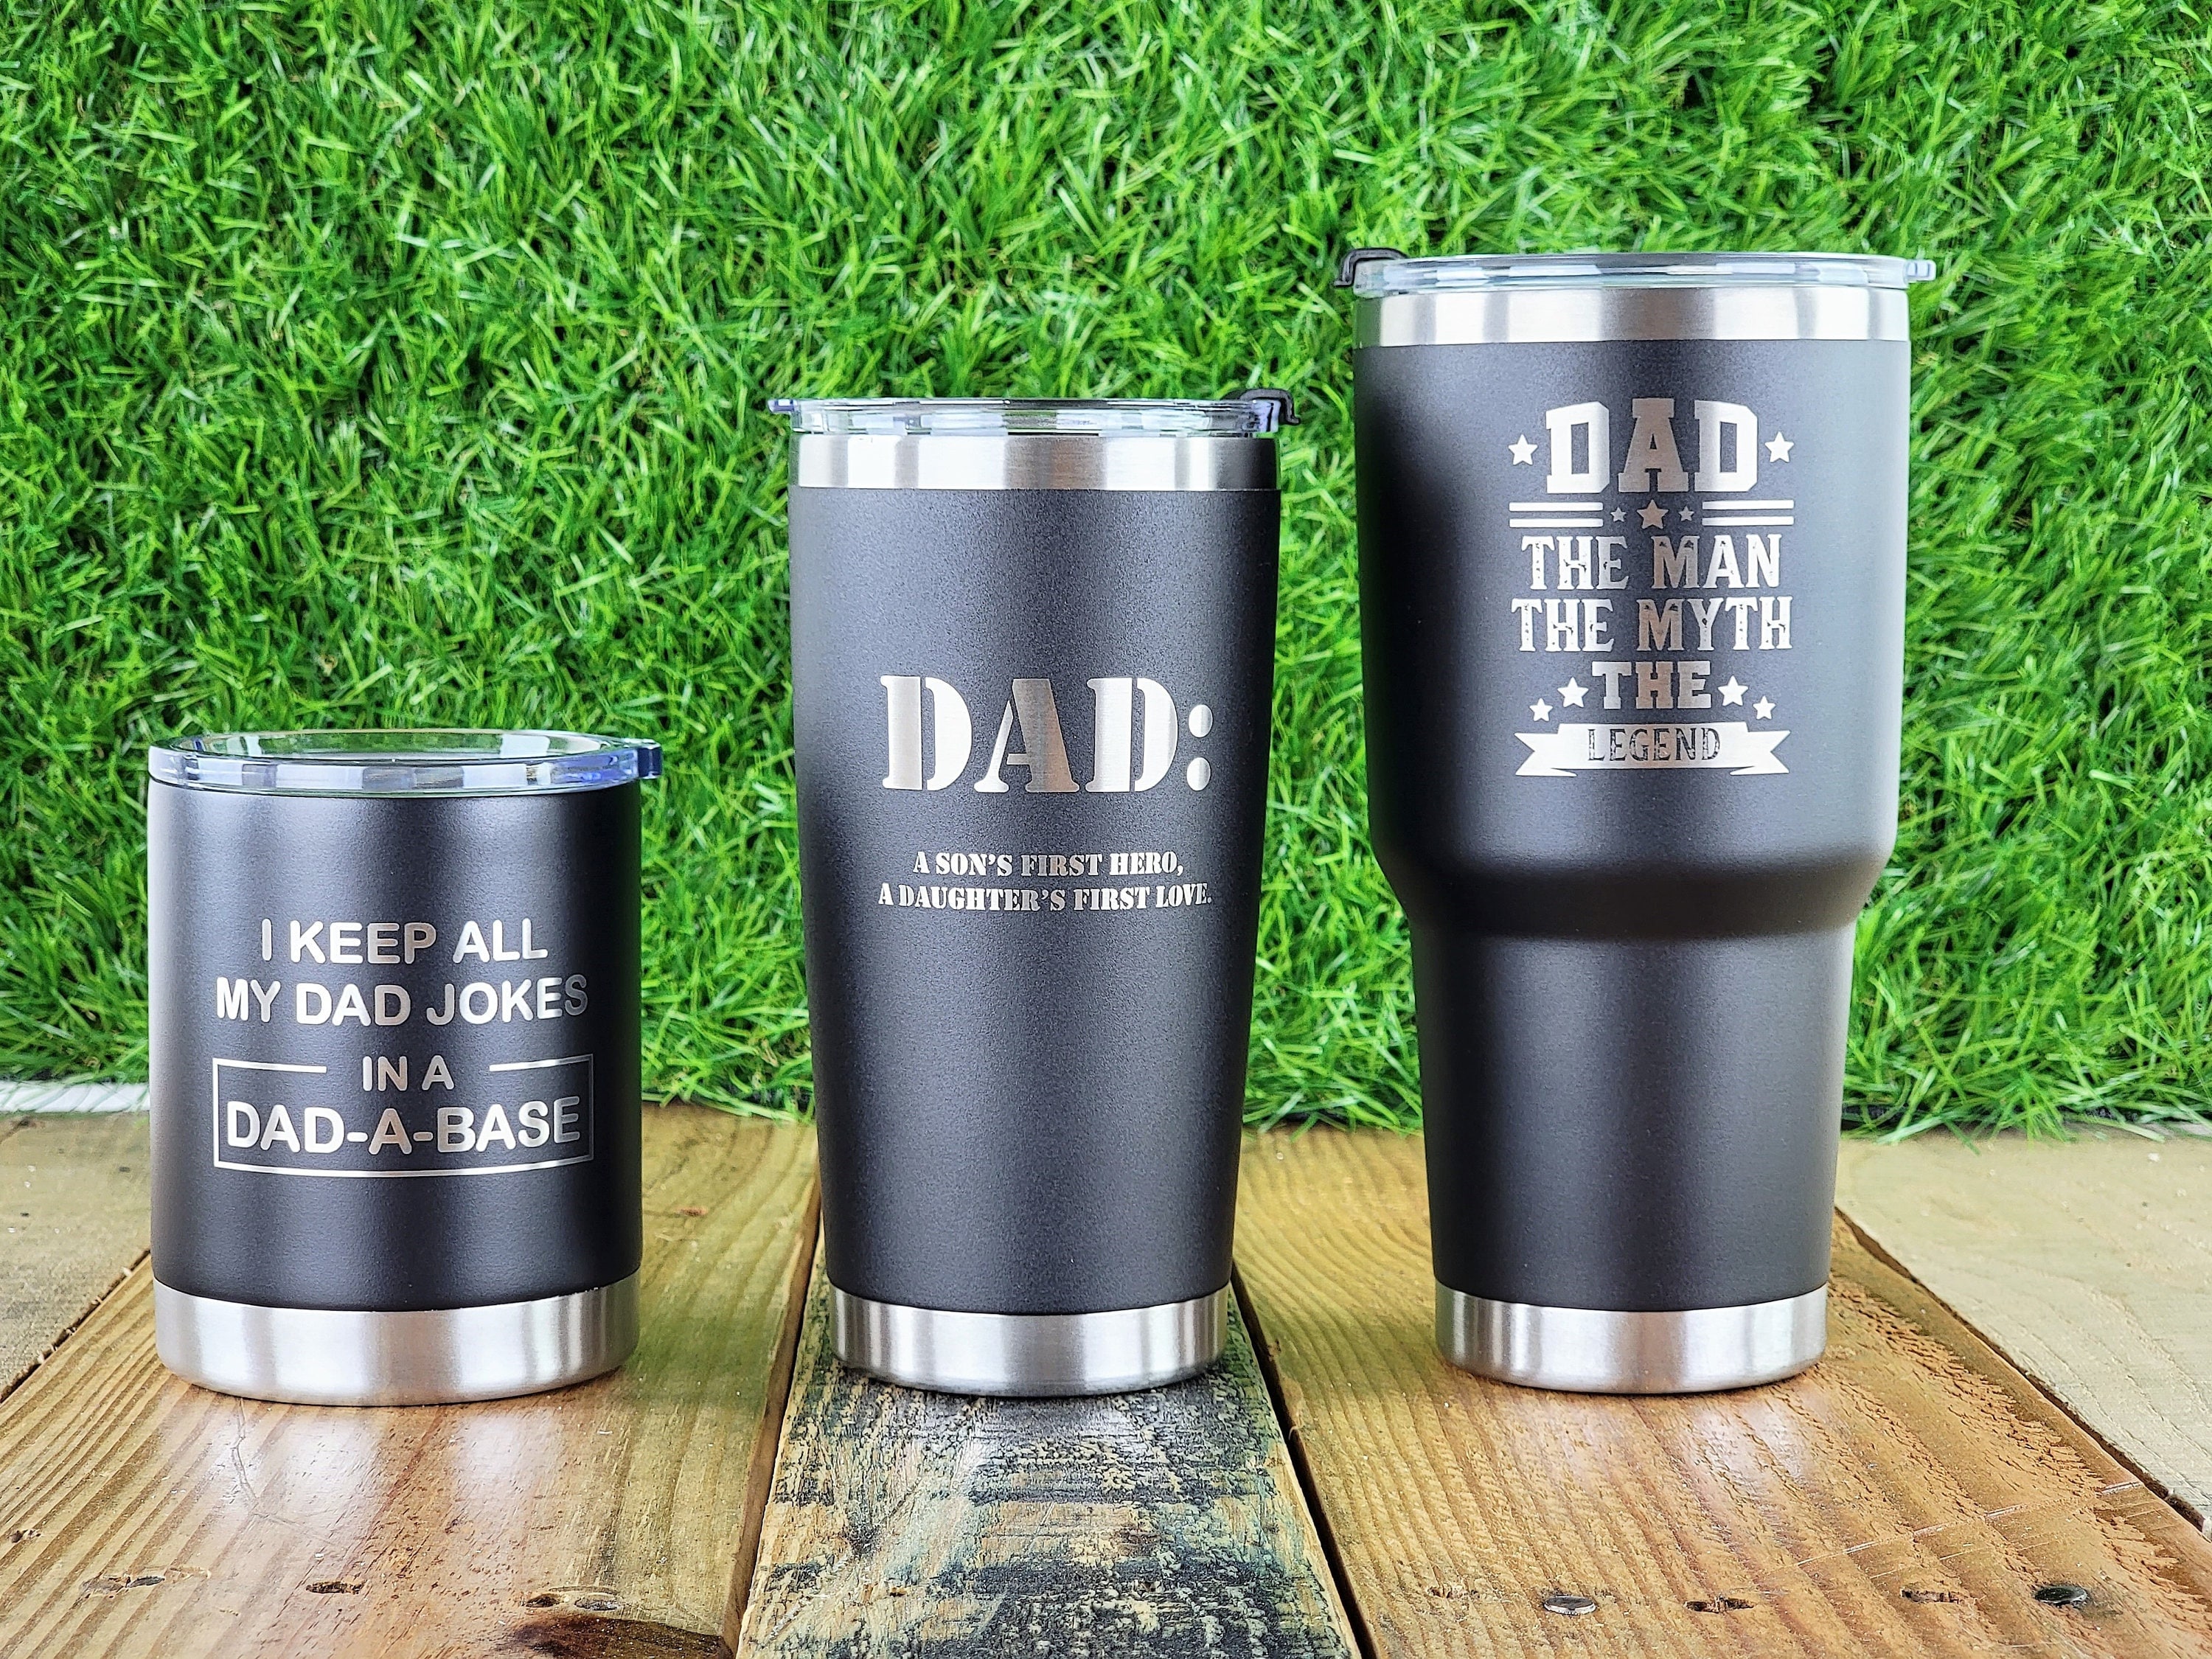 Personalized Travel Mugs for Dad Gifts for Him Dad's Coffee Mug Insulated  Leakproof Stainless Steel Mug Metal Mugs for Men HPM24 